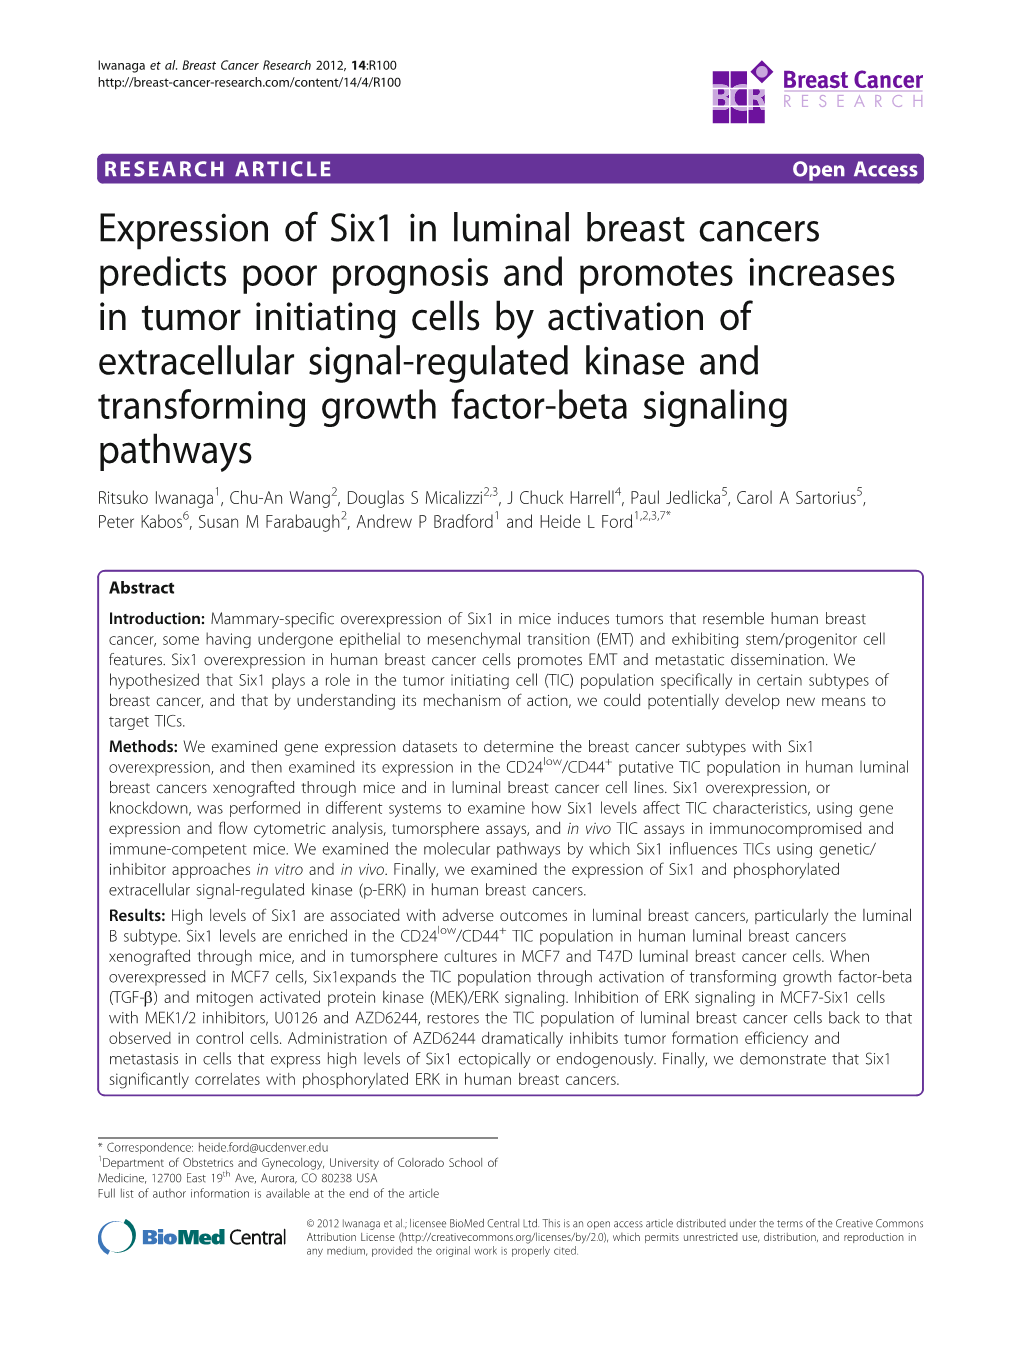 Expression of Six1 in Luminal Breast Cancers Predicts Poor Prognosis